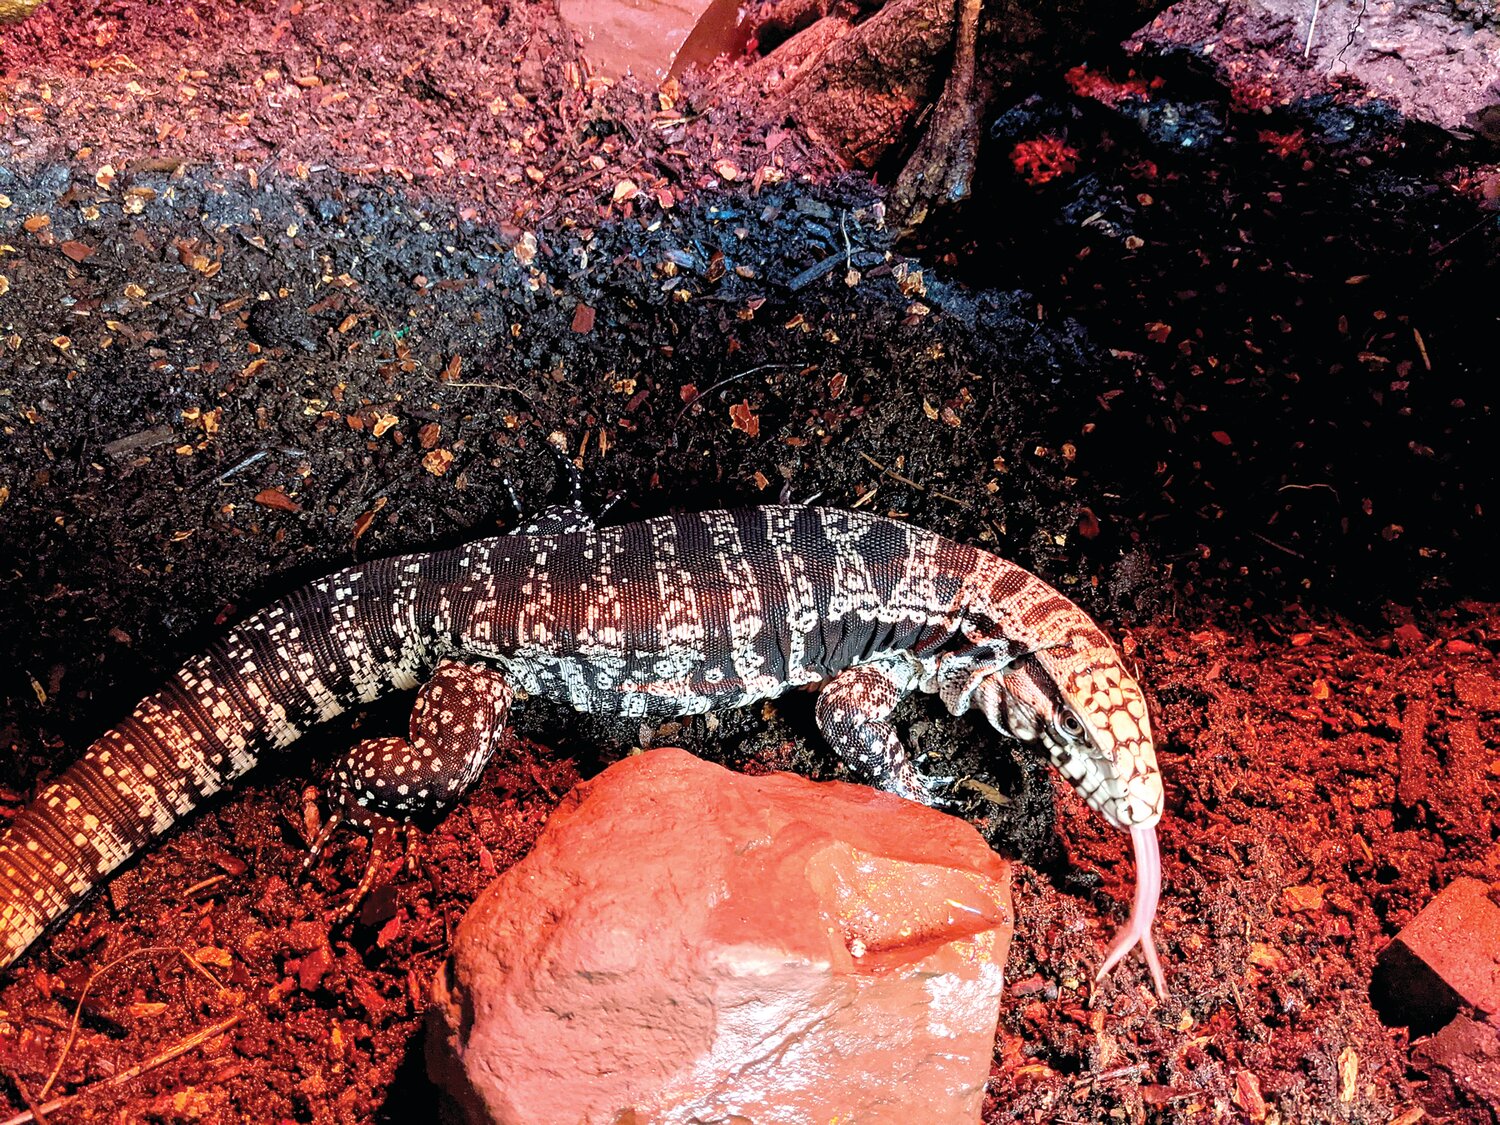 Pearl the Argentine Black and White Tegu lizard is having a 4th birthday party on May 3.